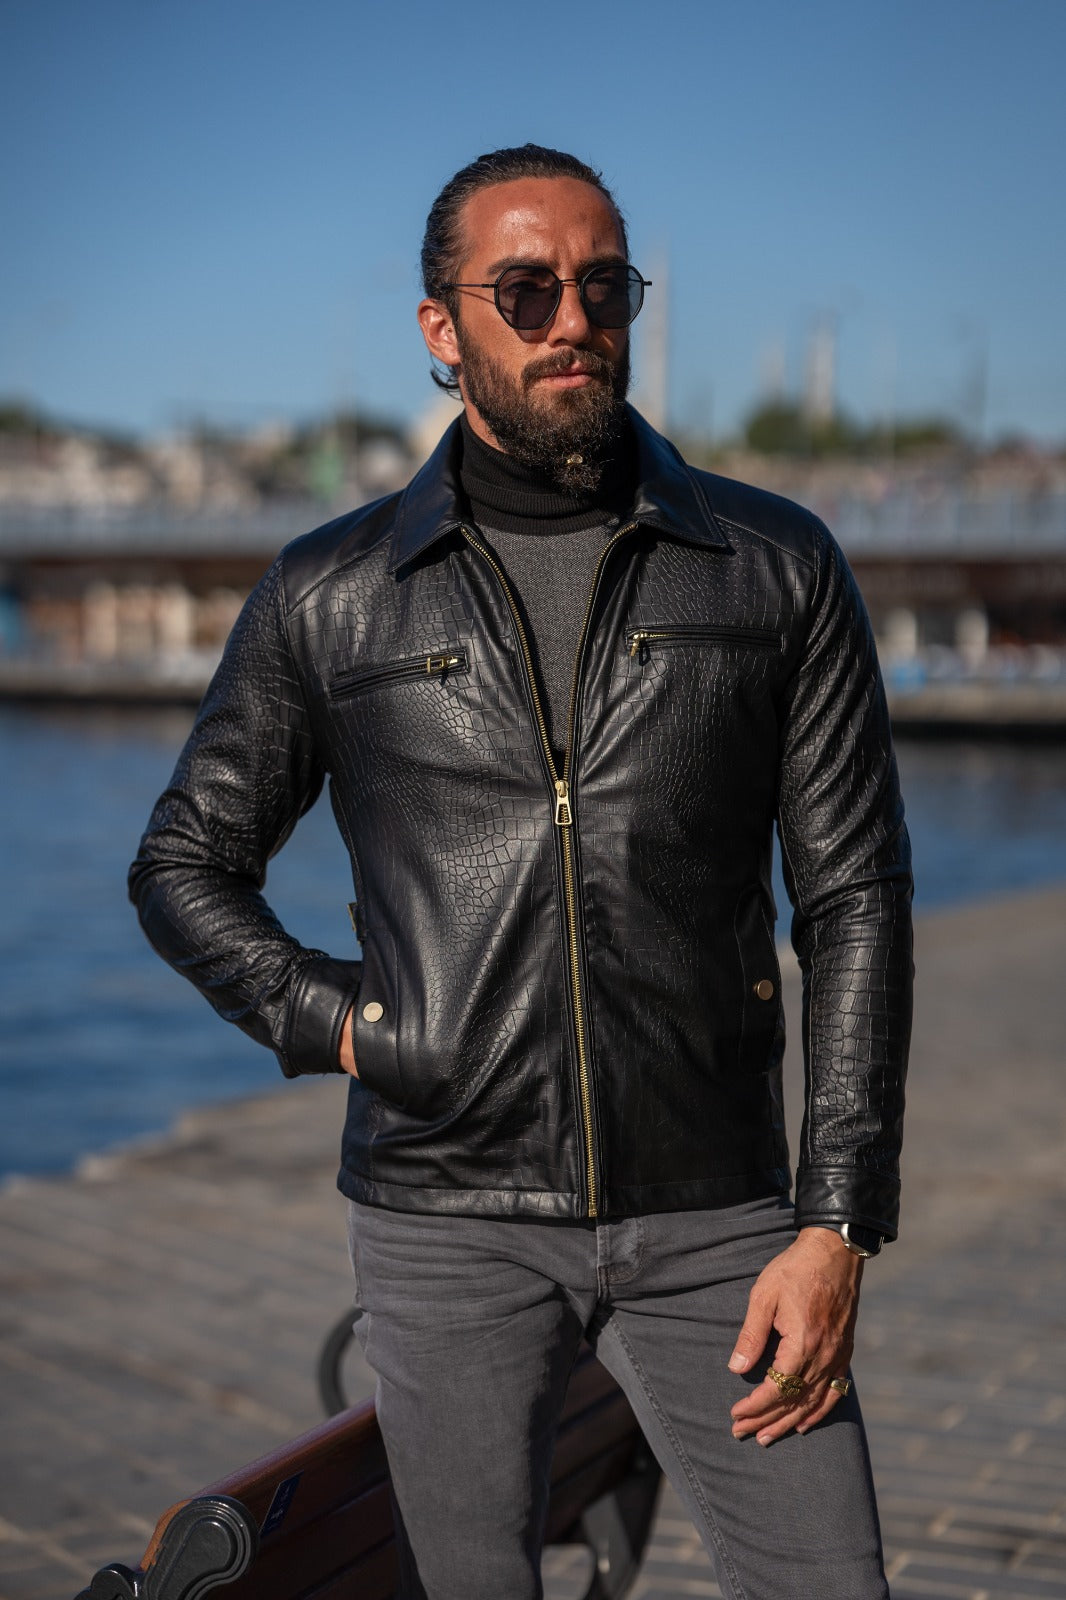 A Slim Fit Special Design Leather Jacket on display